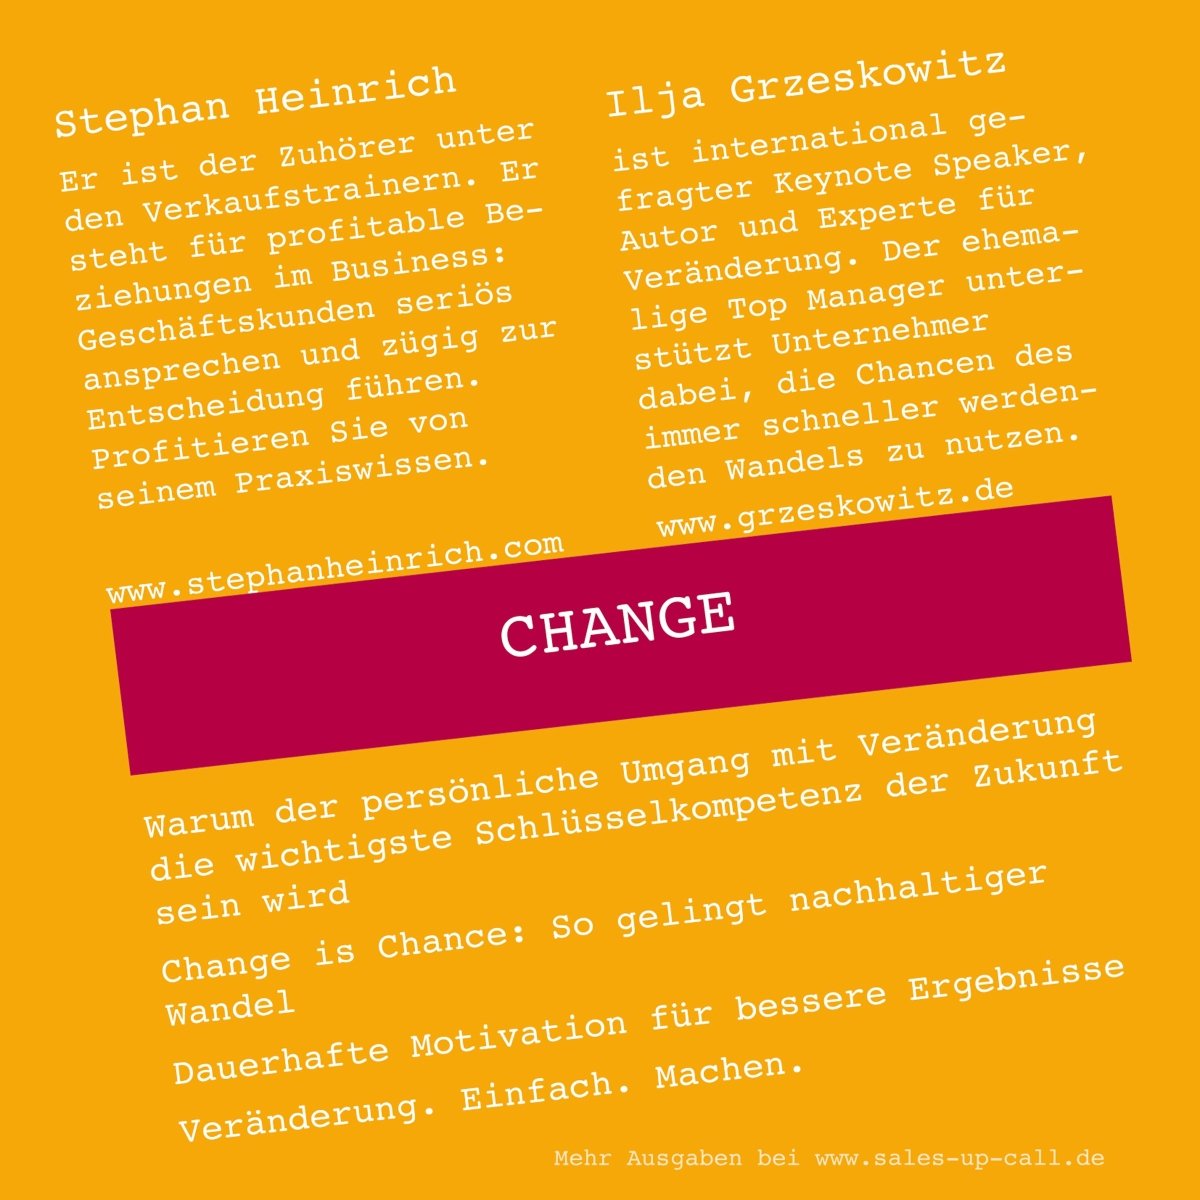 Change - Sales-up-Call - Stephan Heinrich